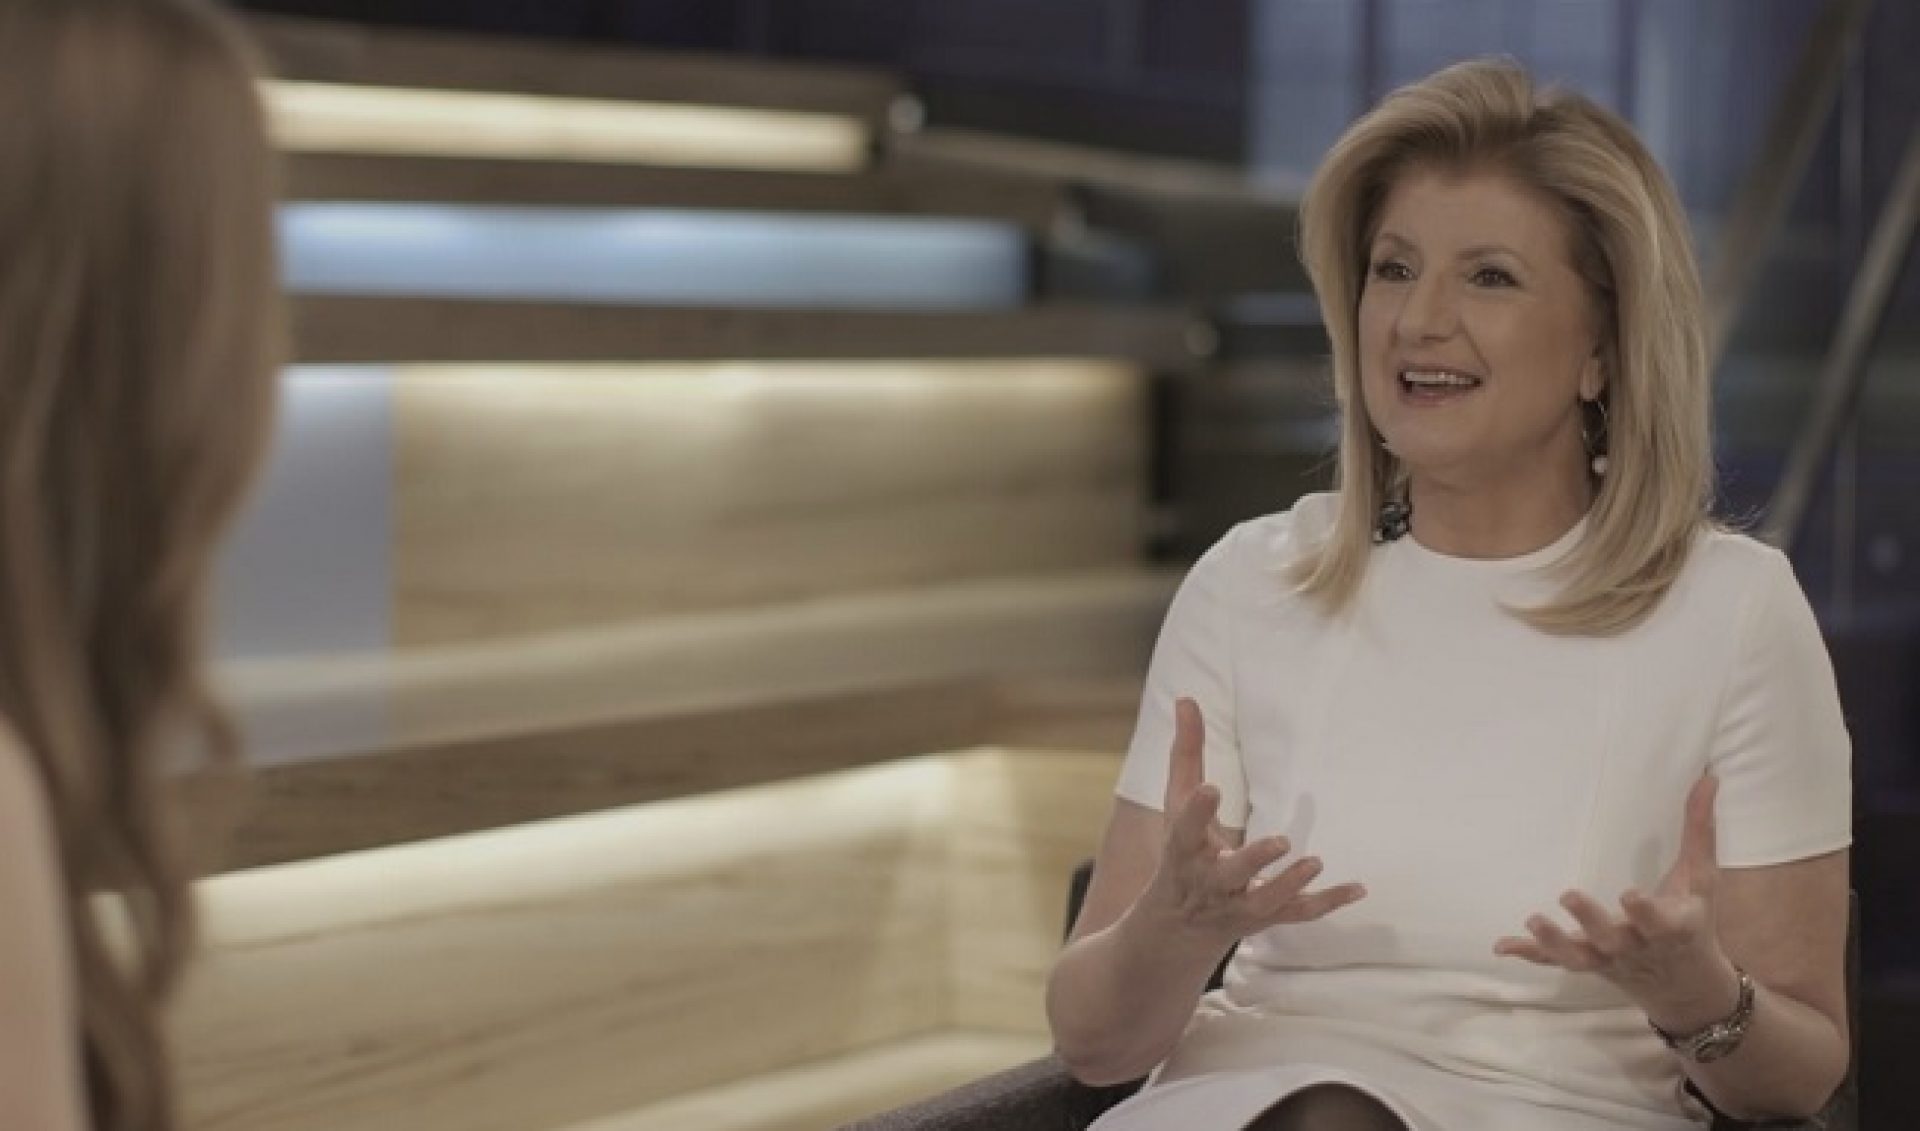 Big Think Explores The “Genius” Of Arianna Huffington, Bill Nye, Others With New Web Series